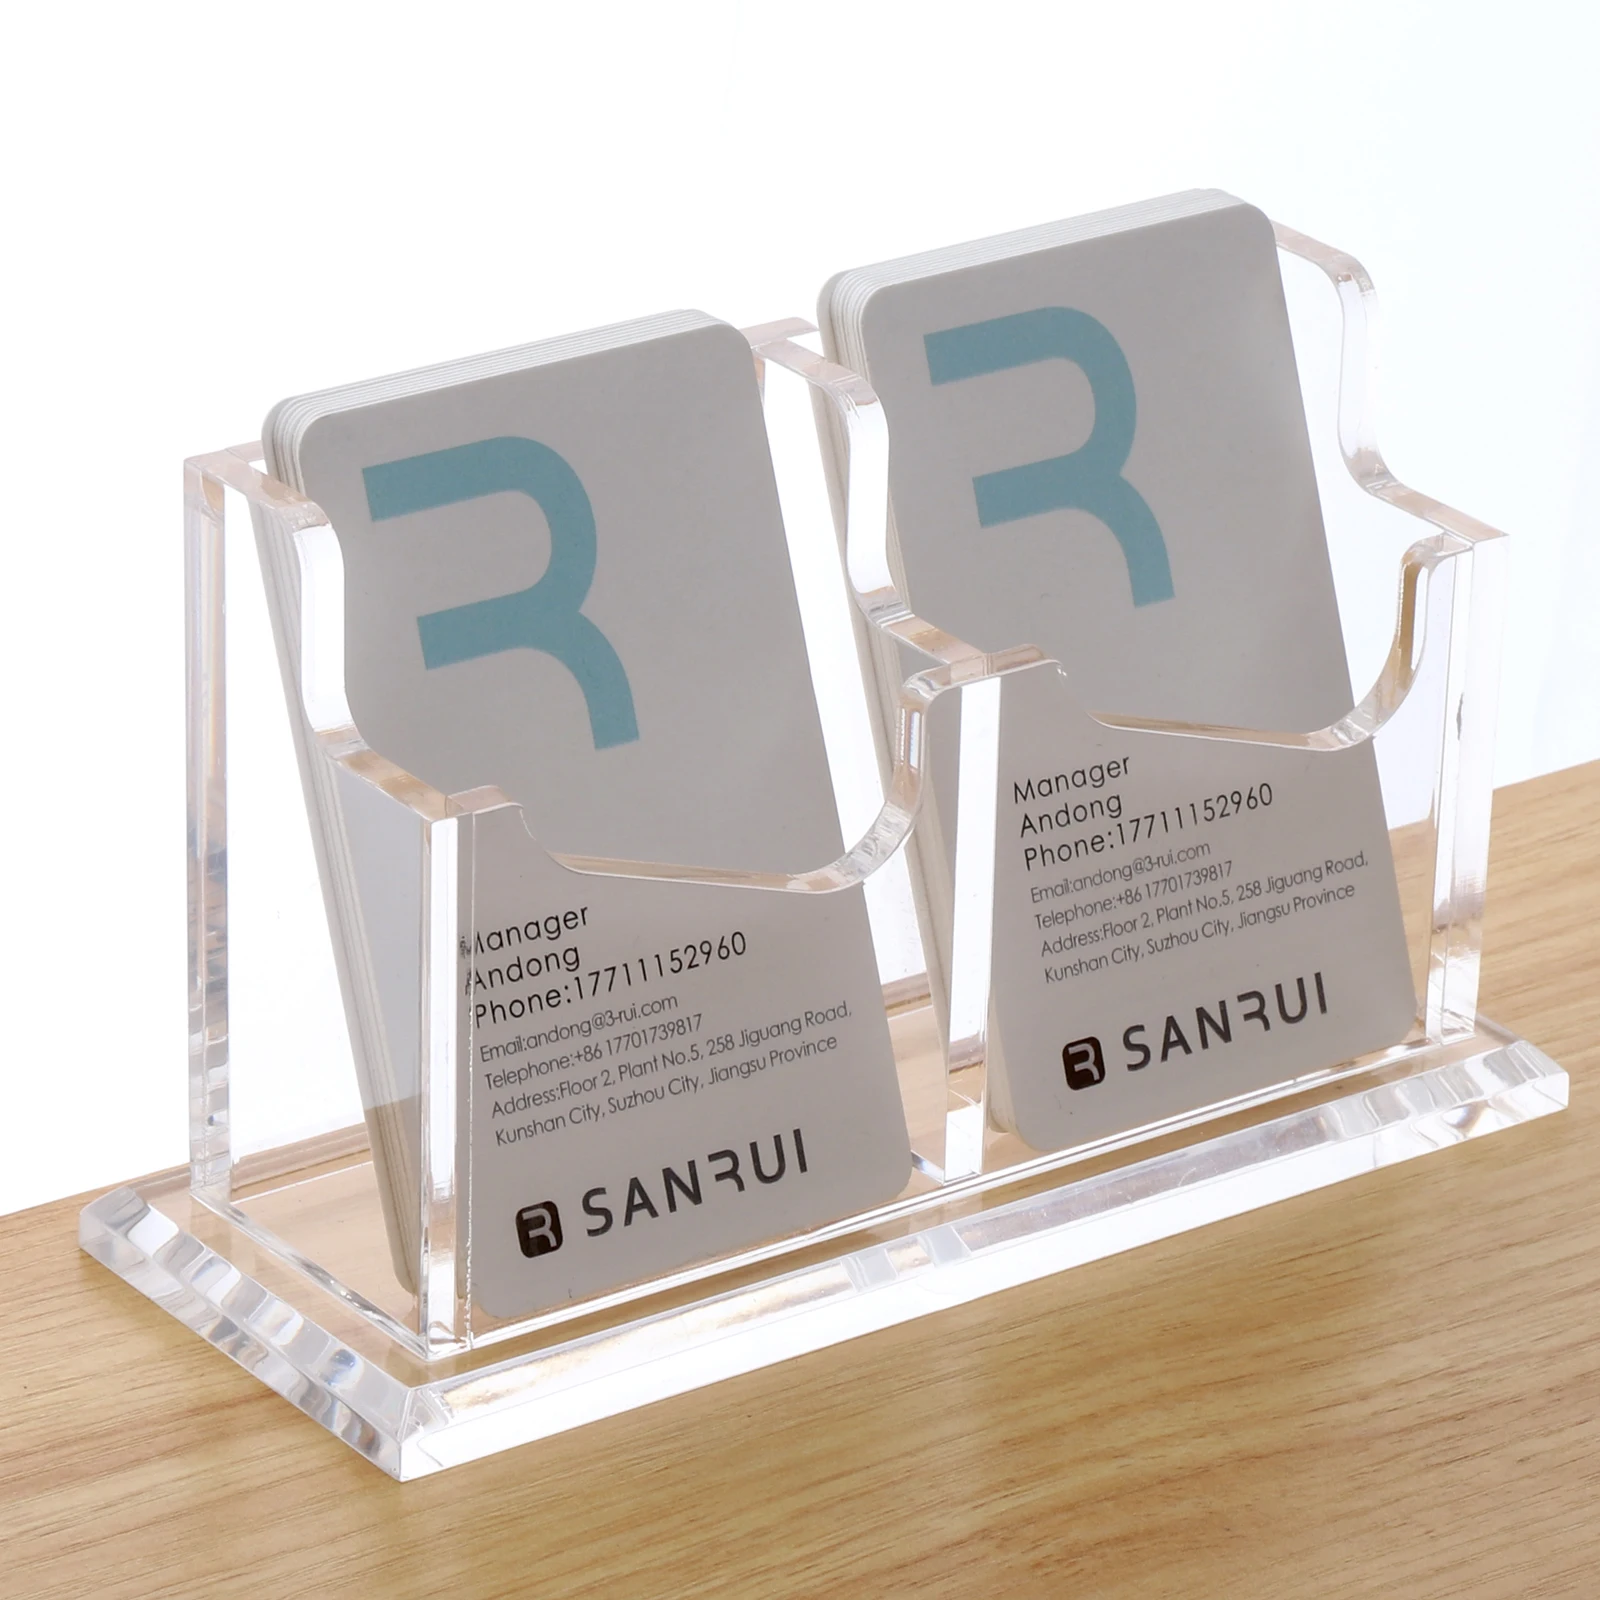 SANRUI Business Card Holder for Desk Vertical Card Display Stand Clear Acrylic 1 Tier 2 Pocket